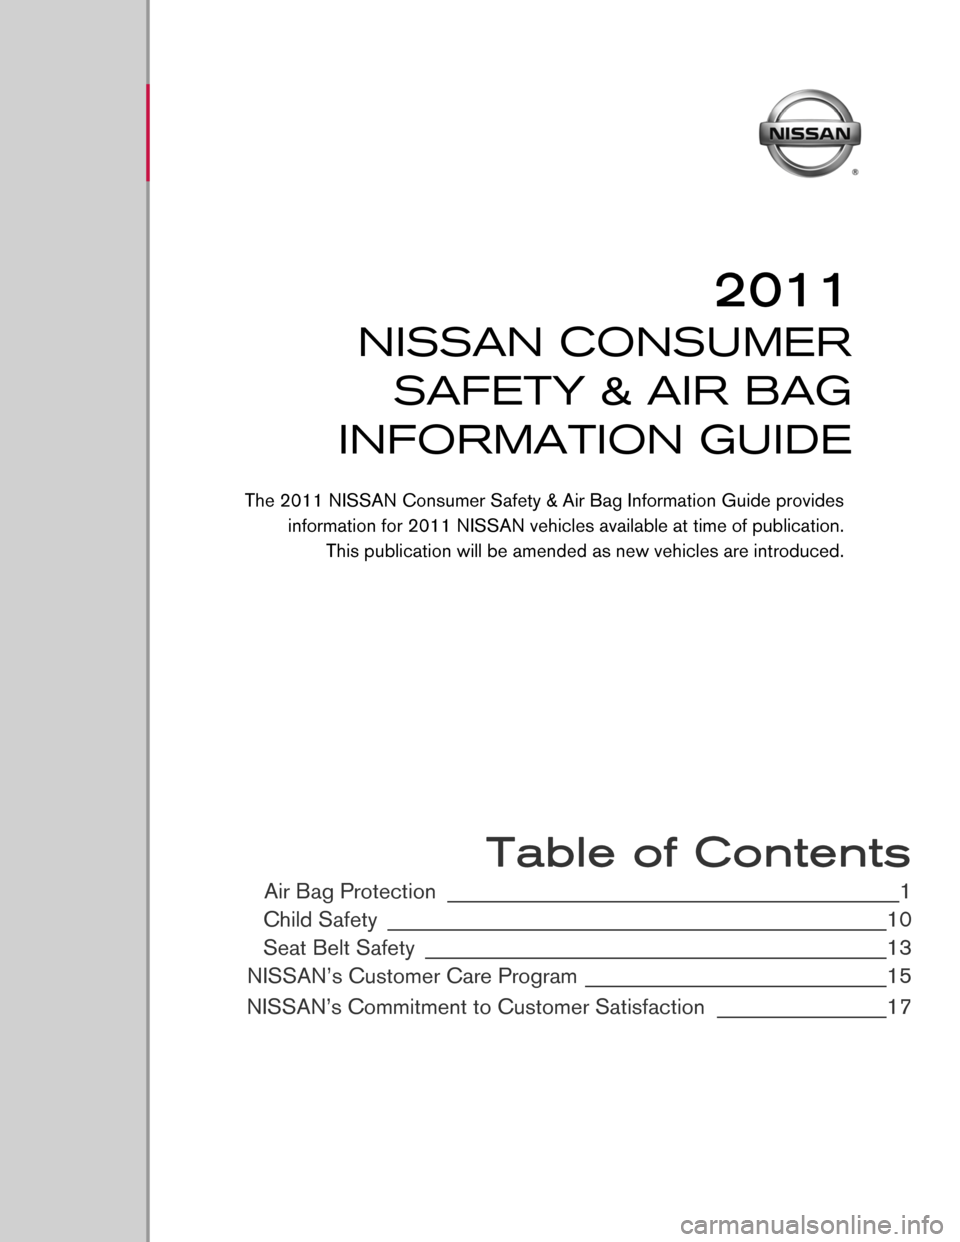 NISSAN VERSA HATCHBACK 2011 1.G Consumer Safety Air Bag Information Guide  
 
 
 
 
 
 
 
 
 
 
 
 
 
 
 
 
 
 
 
 
 
 
 Table of Contents
Air Bag Protection ________________________________________________1
Child Safety
 ____________________________________________________